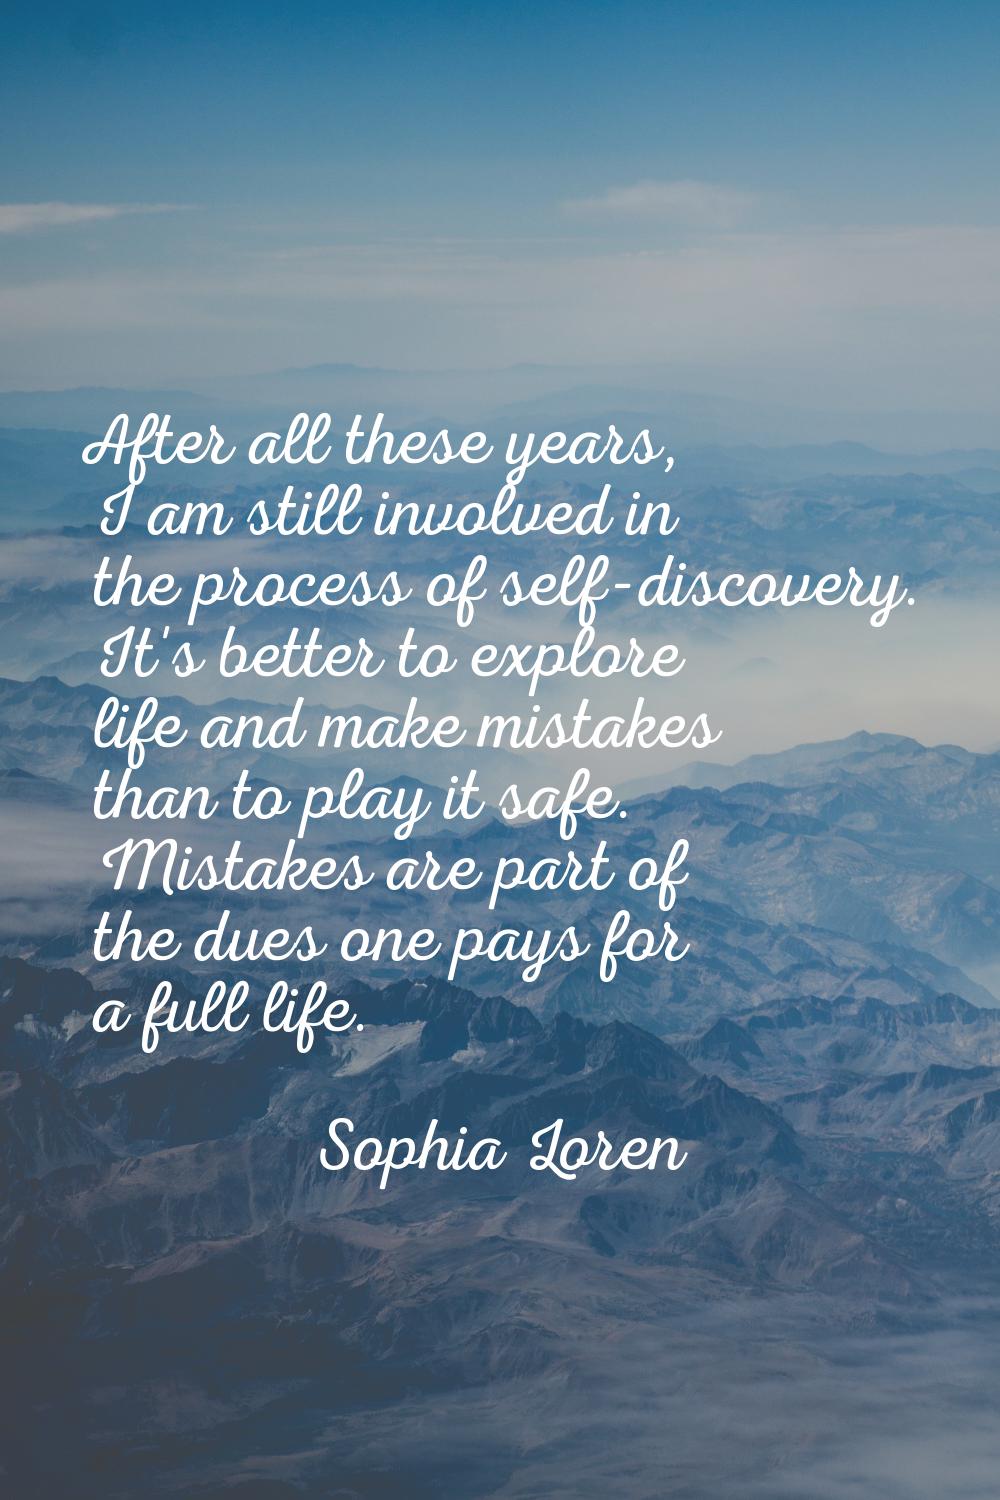 After all these years, I am still involved in the process of self-discovery. It's better to explore